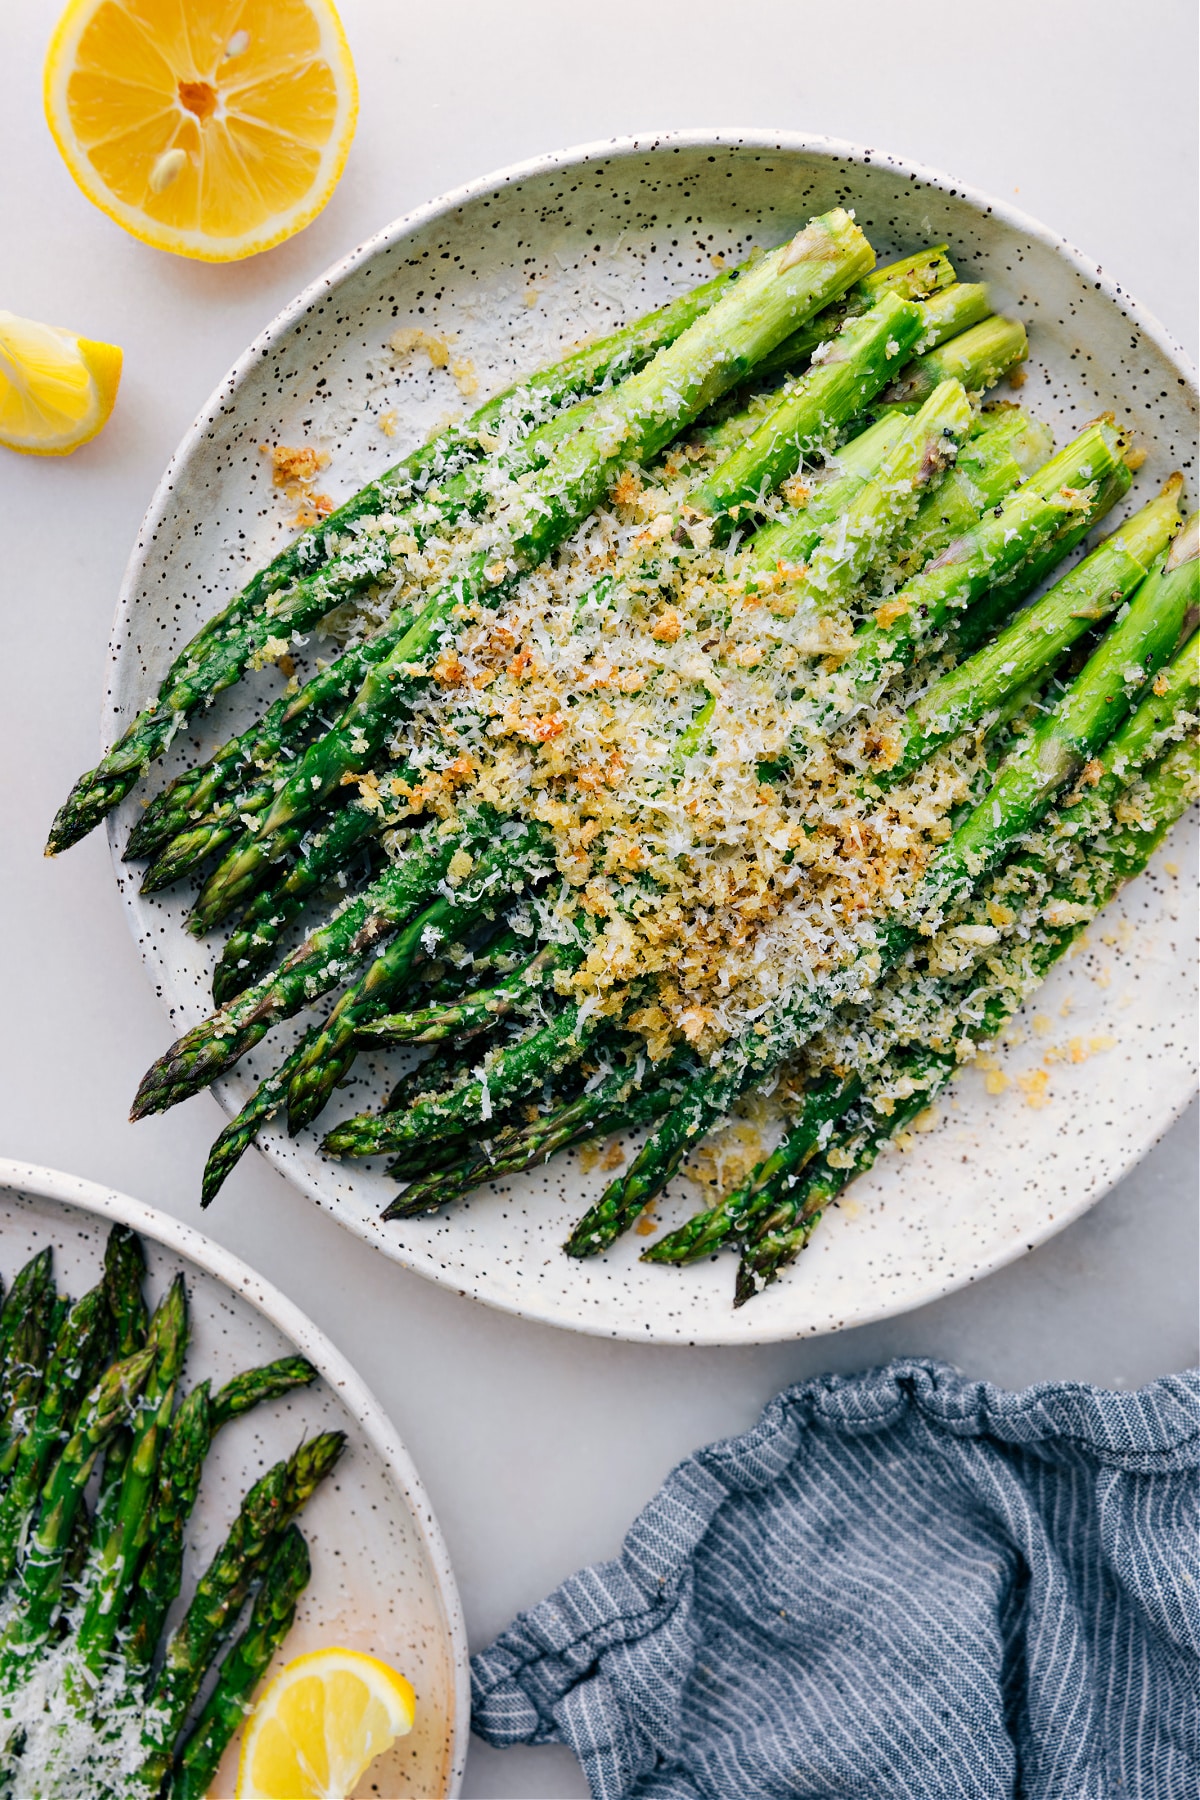 The breadcrumbs and parmesan roasted asparagus option on a plate.